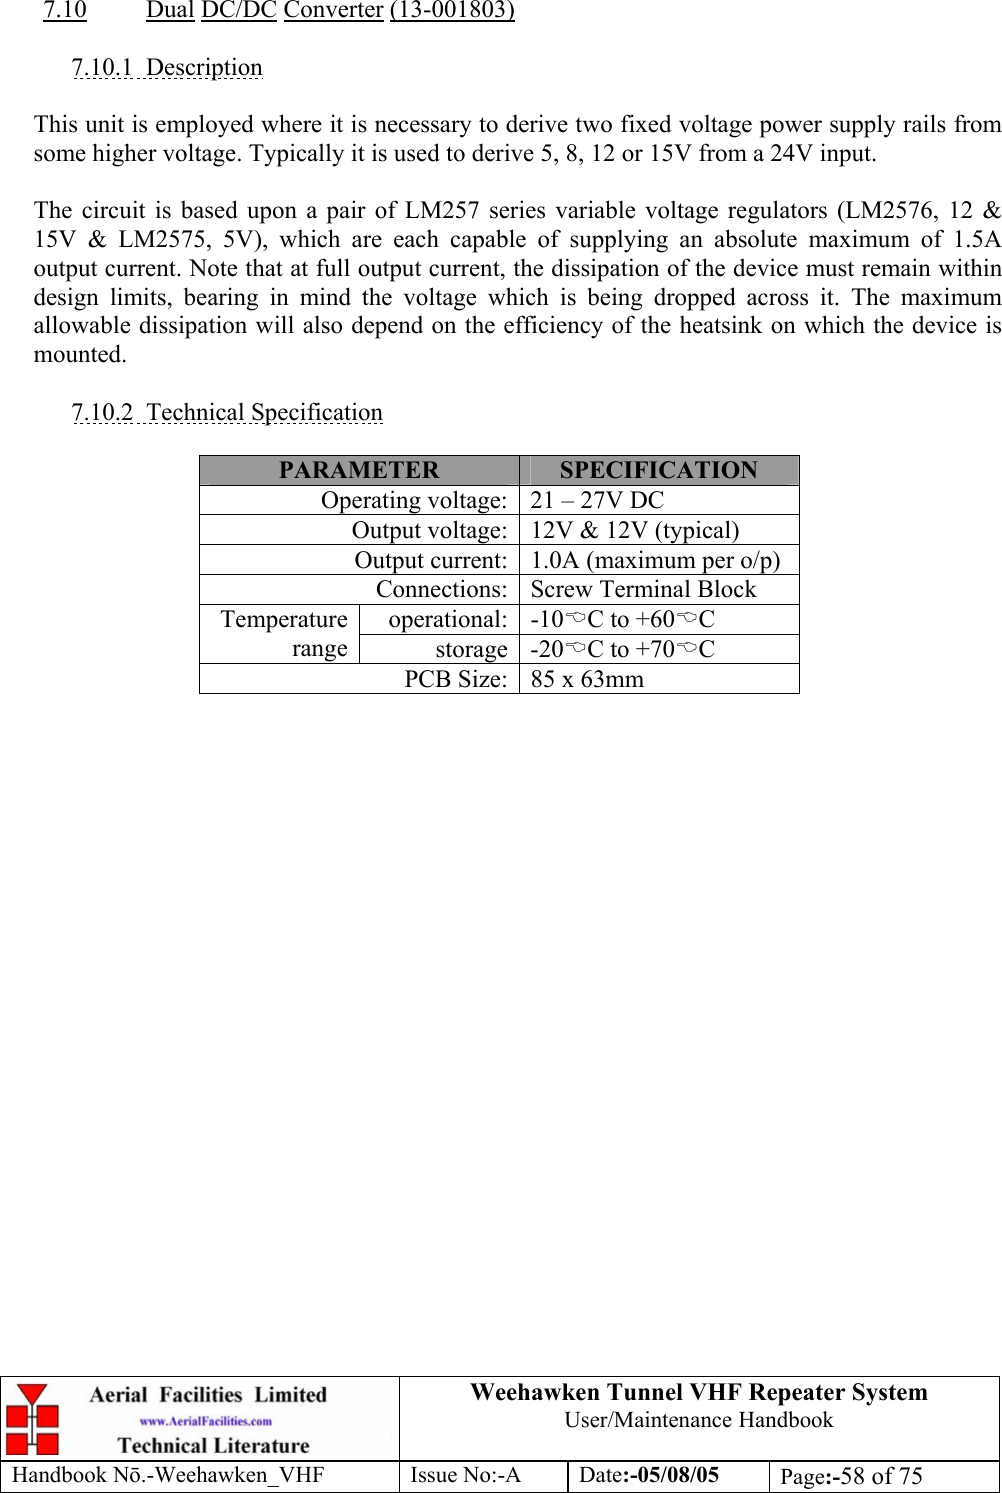  Weehawken Tunnel VHF Repeater System User/Maintenance Handbook Handbook N.-Weehawken_VHF Issue No:-A Date:-05/08/05  Page:-58 of 75   7.10 Dual DC/DC Converter (13-001803)  7.10.1 Description  This unit is employed where it is necessary to derive two fixed voltage power supply rails from some higher voltage. Typically it is used to derive 5, 8, 12 or 15V from a 24V input.  The circuit is based upon a pair of LM257 series variable voltage regulators (LM2576, 12 &amp; 15V &amp; LM2575, 5V), which are each capable of supplying an absolute maximum of 1.5A output current. Note that at full output current, the dissipation of the device must remain within design limits, bearing in mind the voltage which is being dropped across it. The maximum allowable dissipation will also depend on the efficiency of the heatsink on which the device is mounted.  7.10.2 Technical Specification  PARAMETER  SPECIFICATION Operating voltage: 21 – 27V DC Output voltage: 12V &amp; 12V (typical) Output current: 1.0A (maximum per o/p) Connections: Screw Terminal Block operational: -10%C to +60%C Temperature range  storage -20%C to +70%C PCB Size: 85 x 63mm  